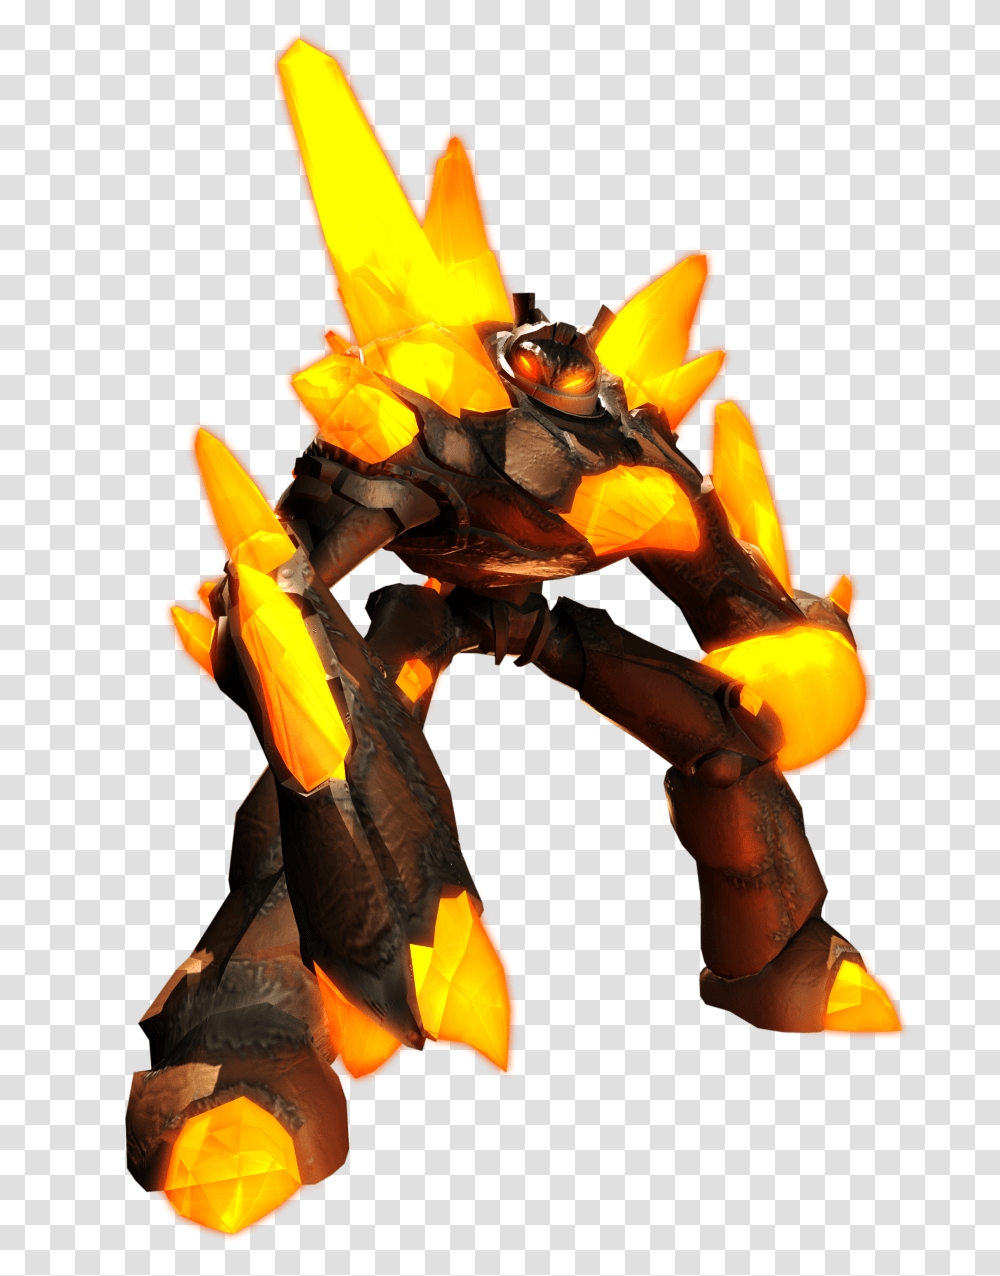 Hd Metroid Prime Hunters Characters, Fire, Robot, Flame Transparent Png